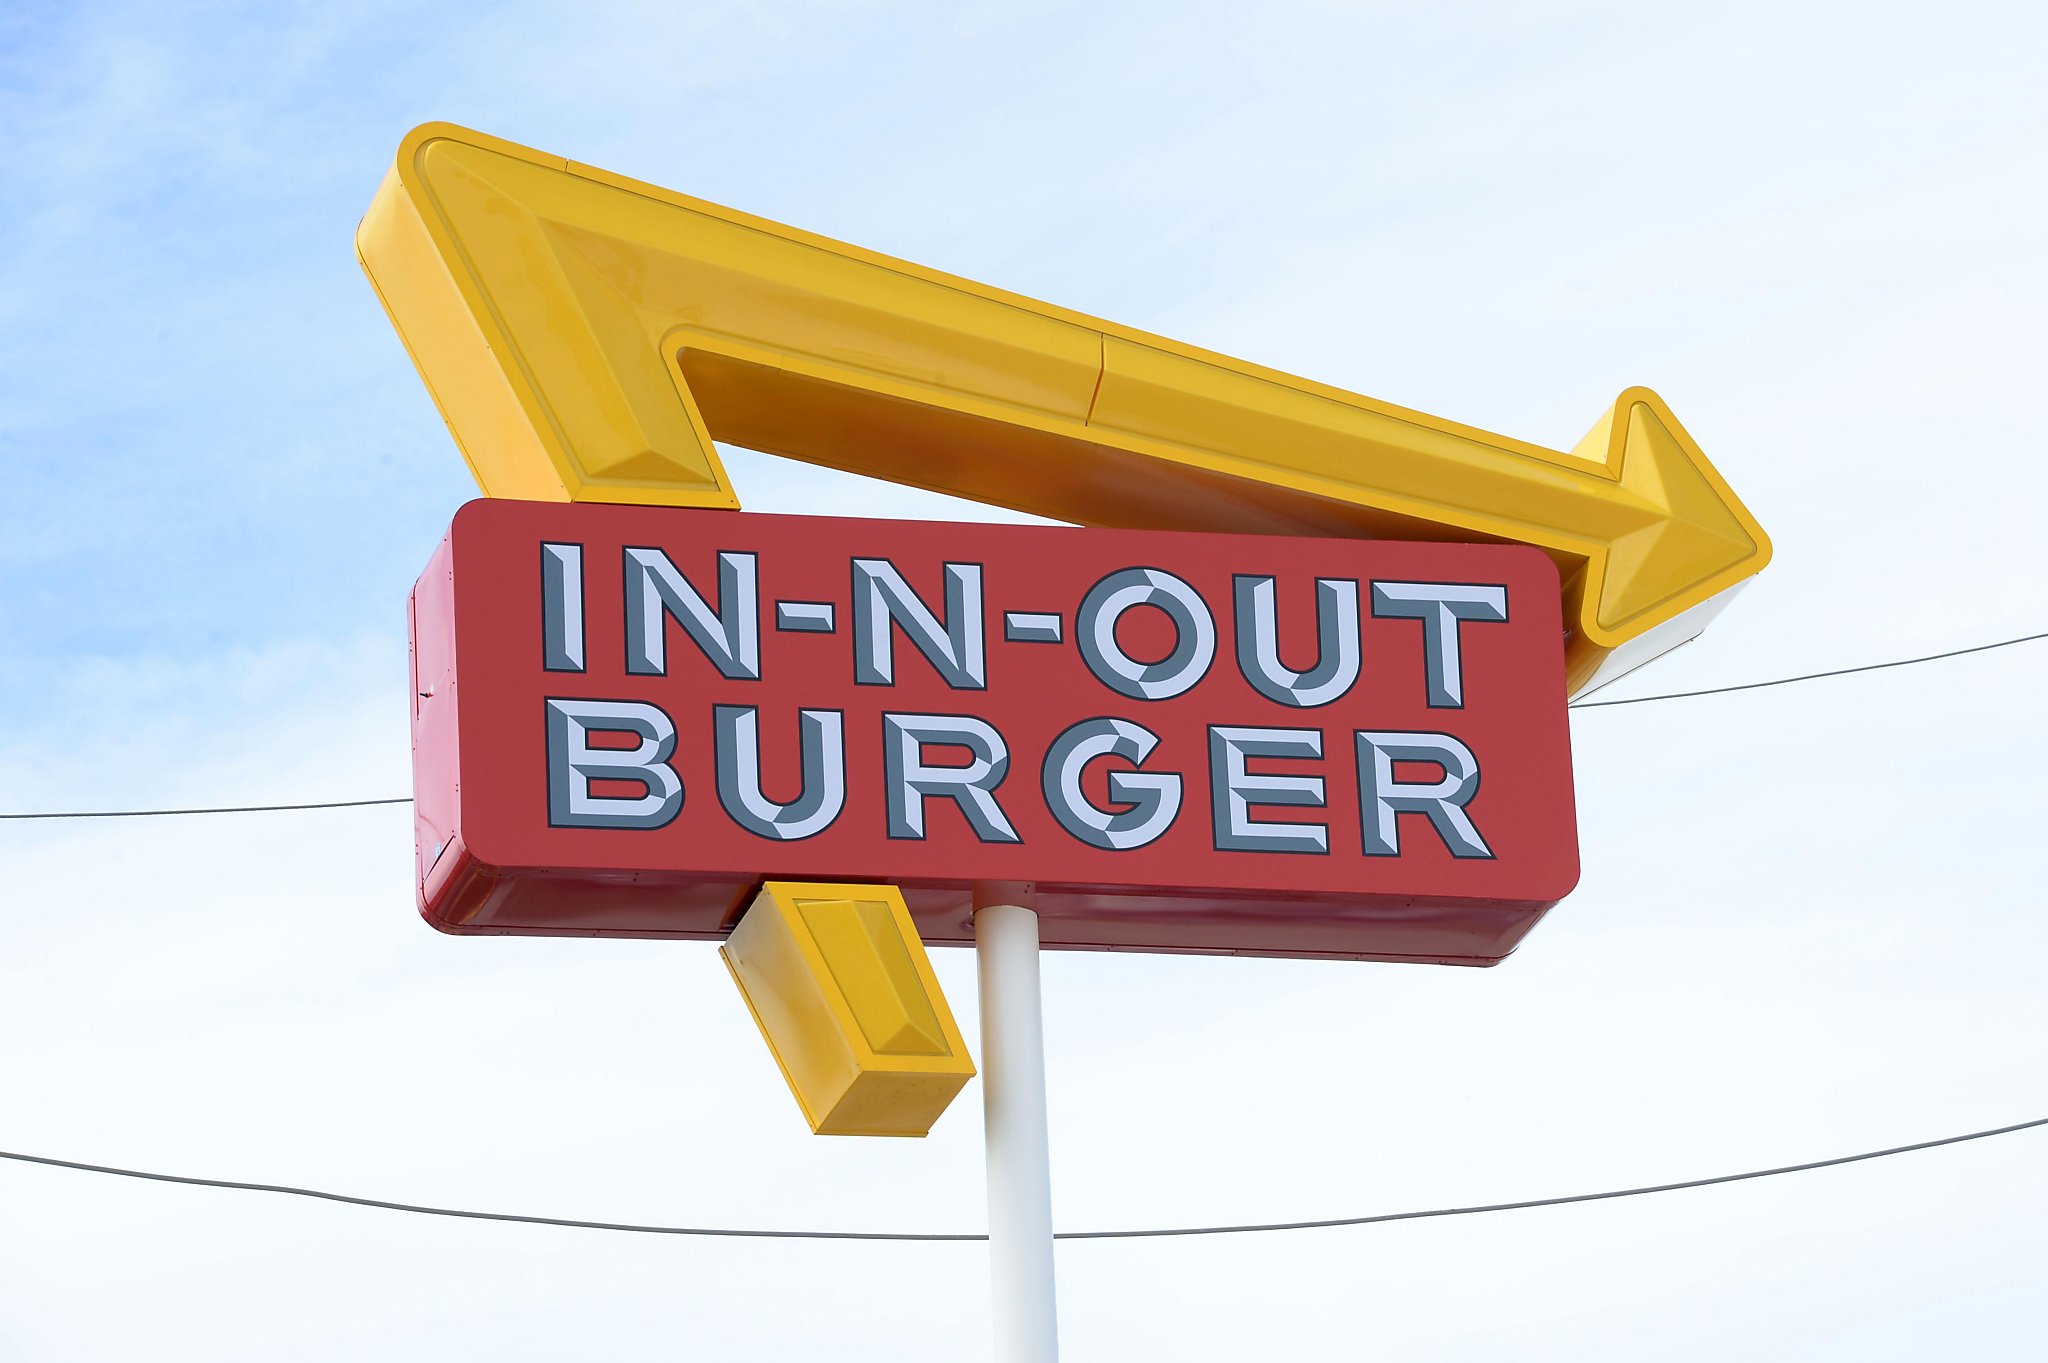 145 Colorado In-N-Out employees have tested positive for COVID-19 since December - SF Gate